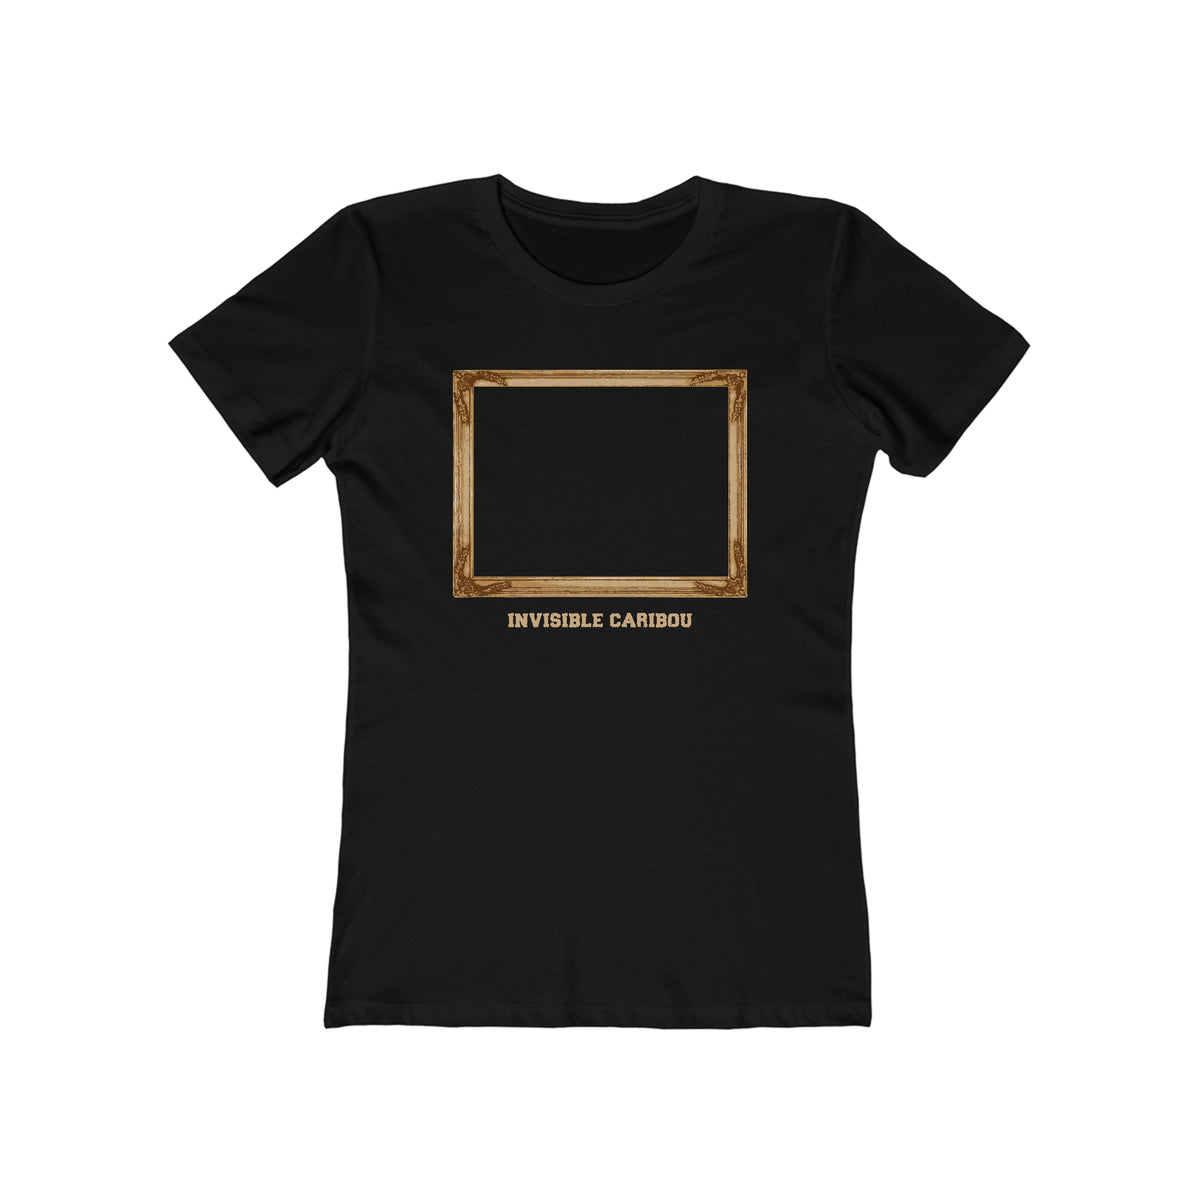 Invisible Caribou - Women’s T-Shirt